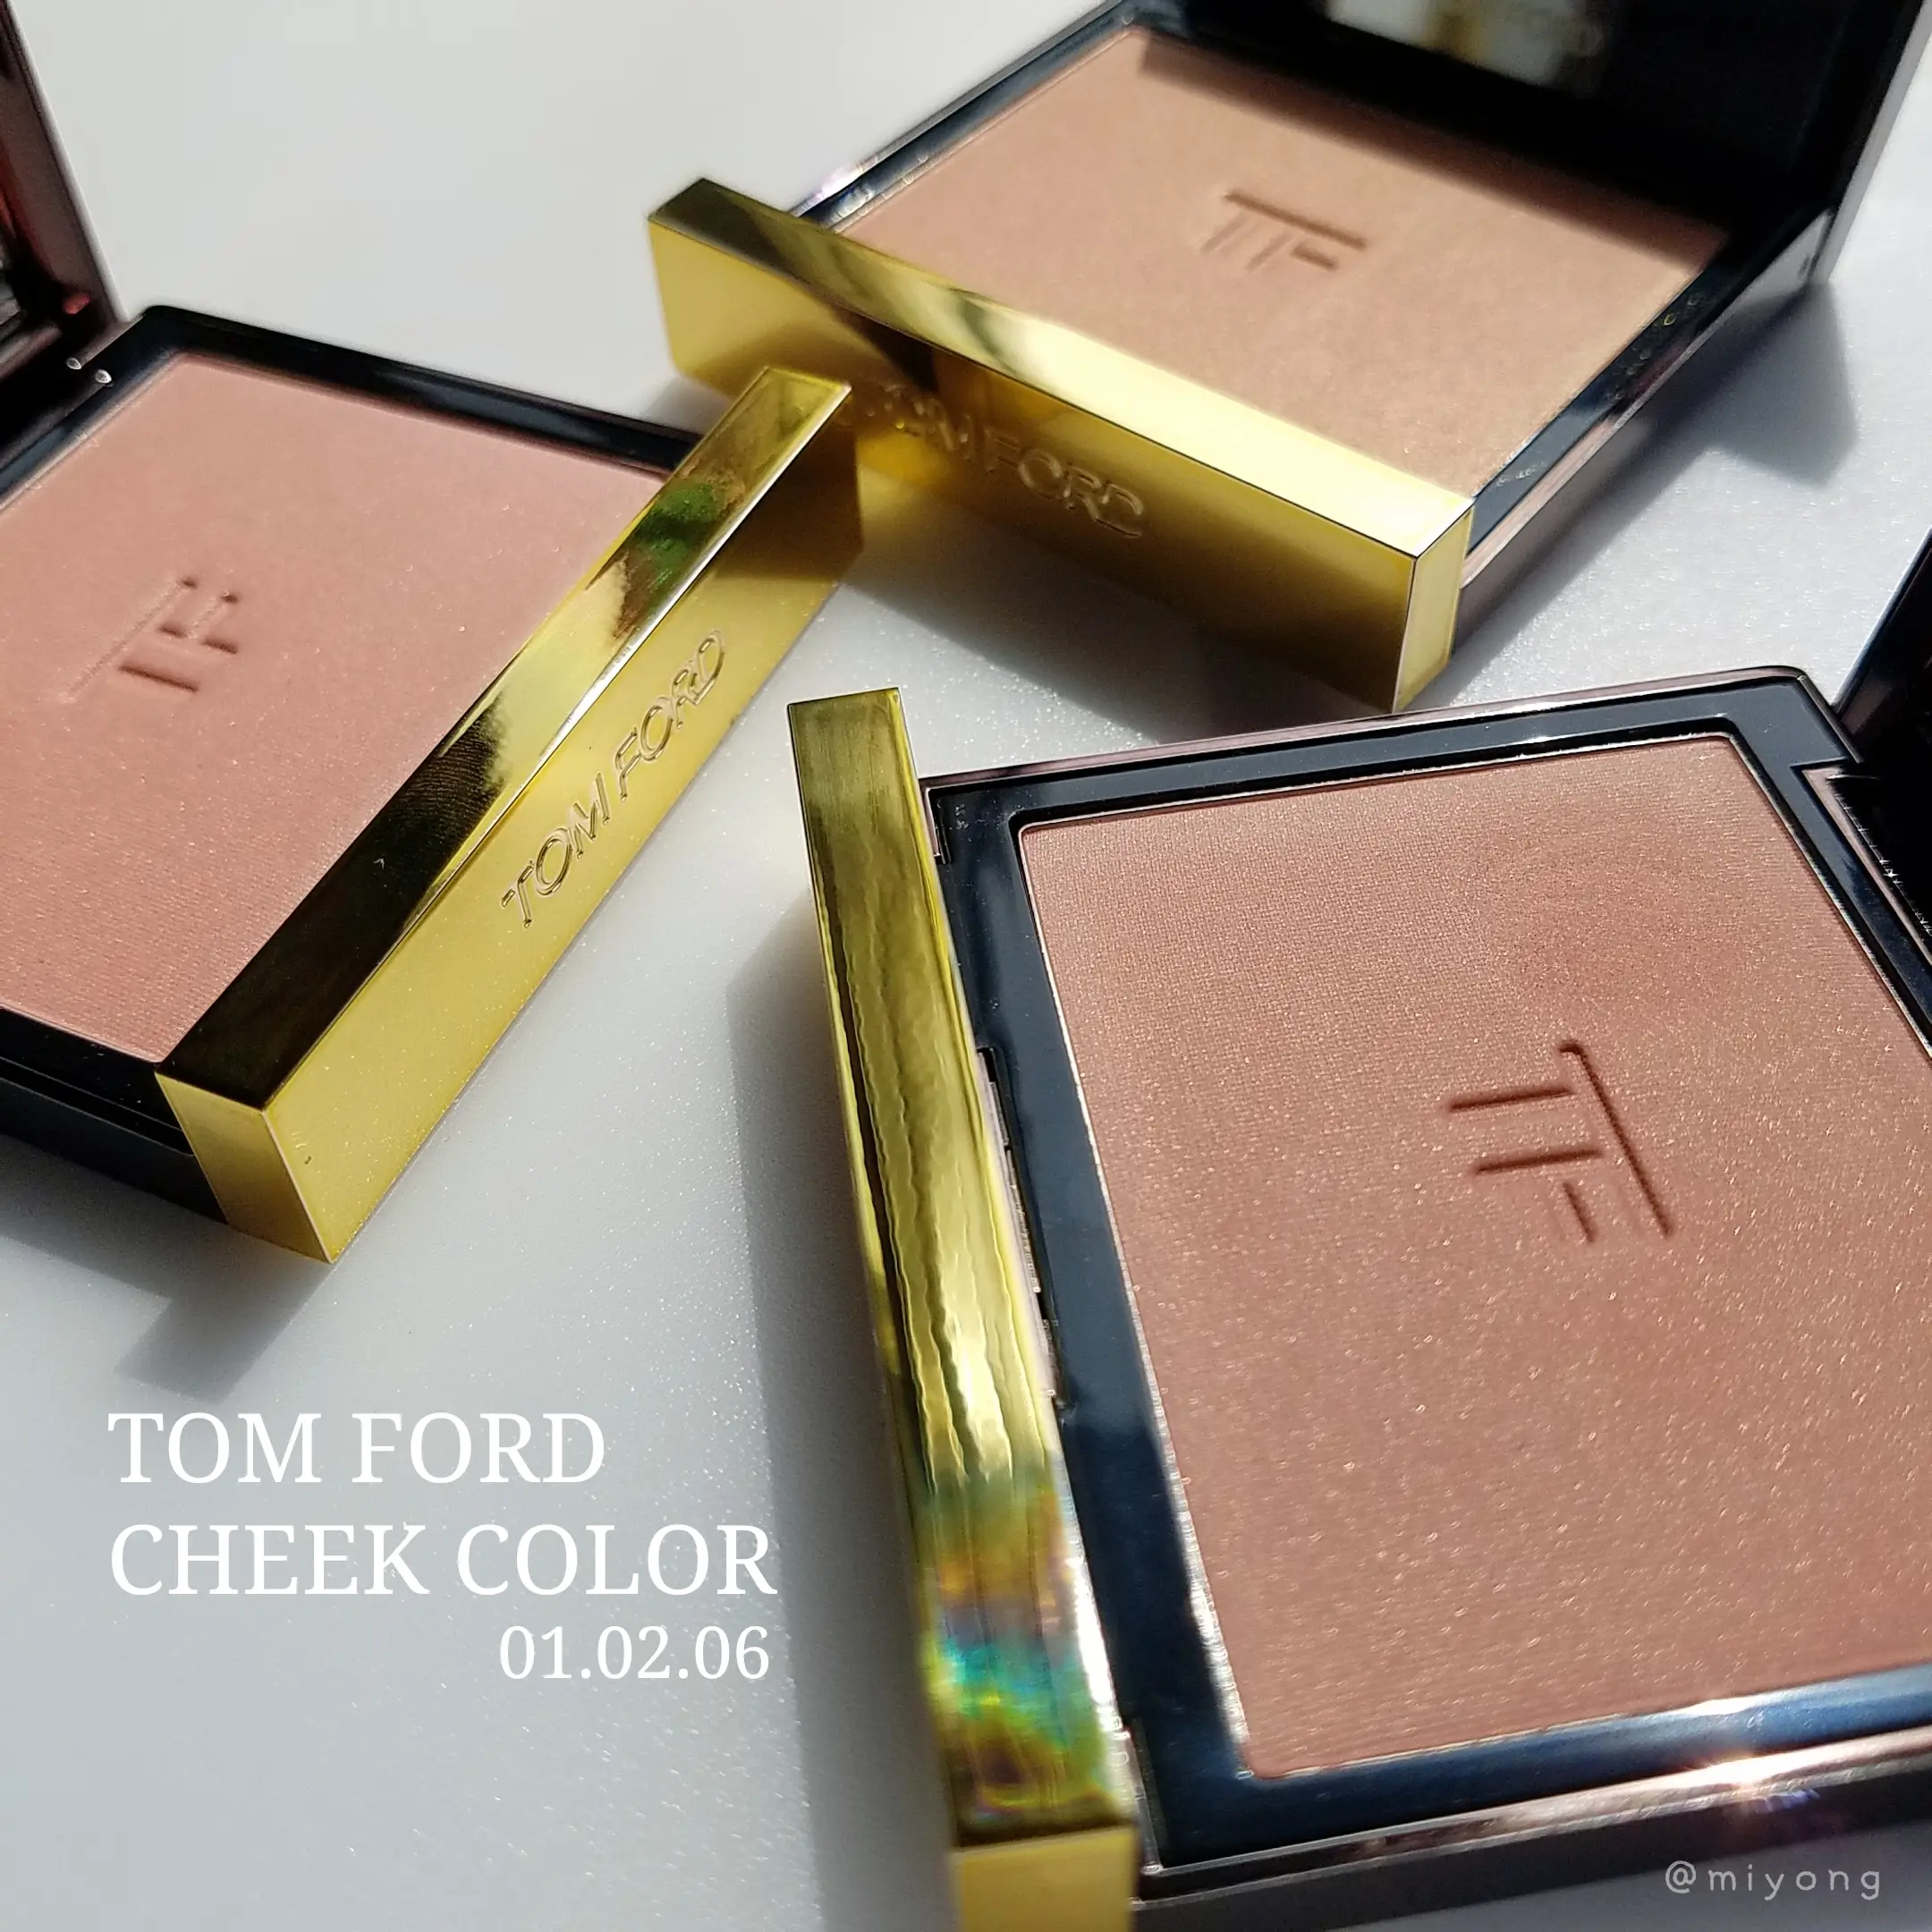 TOMFORD 春夏に使いたいチークレス風カラー 3選 | Gallery posted by